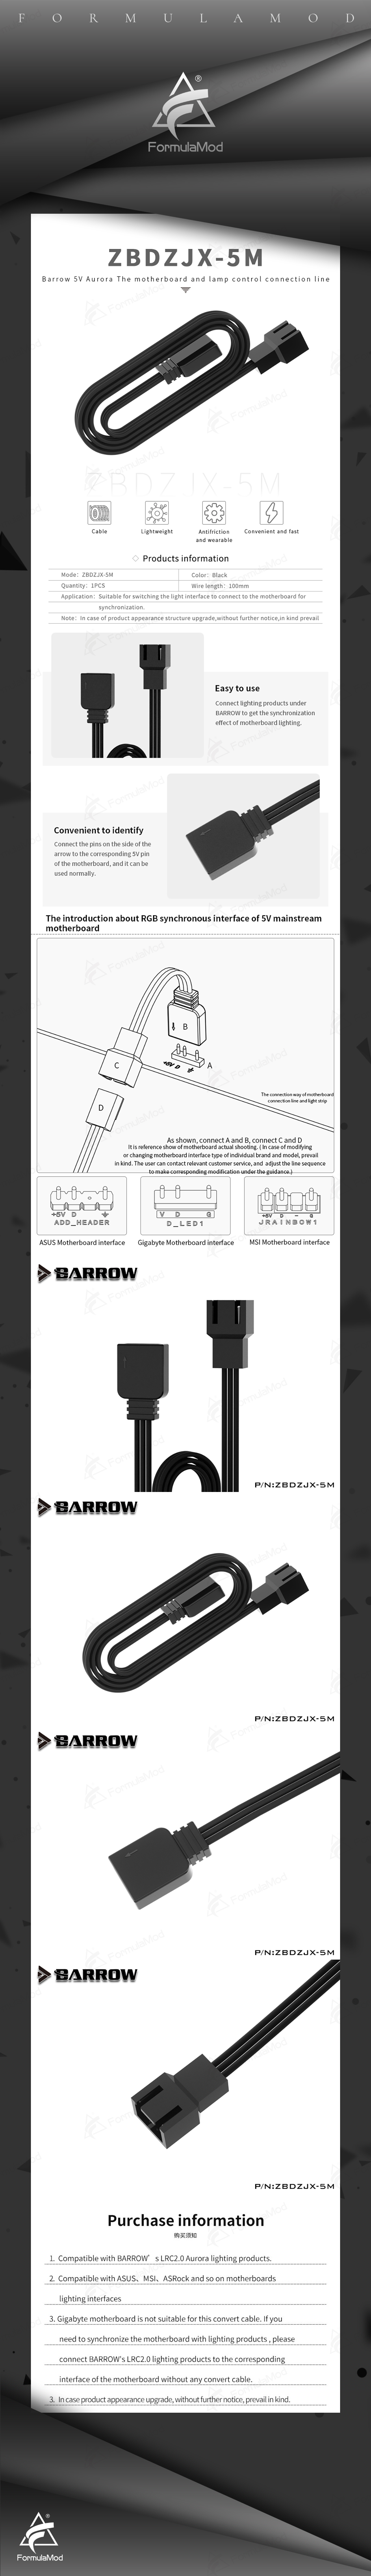 Barrow Motherboard Synchronization Cable, For Barrow 5v Lighting Strip Suitable, For Motherboard 5v 3pin Interface,  ZBDZJX-5M  